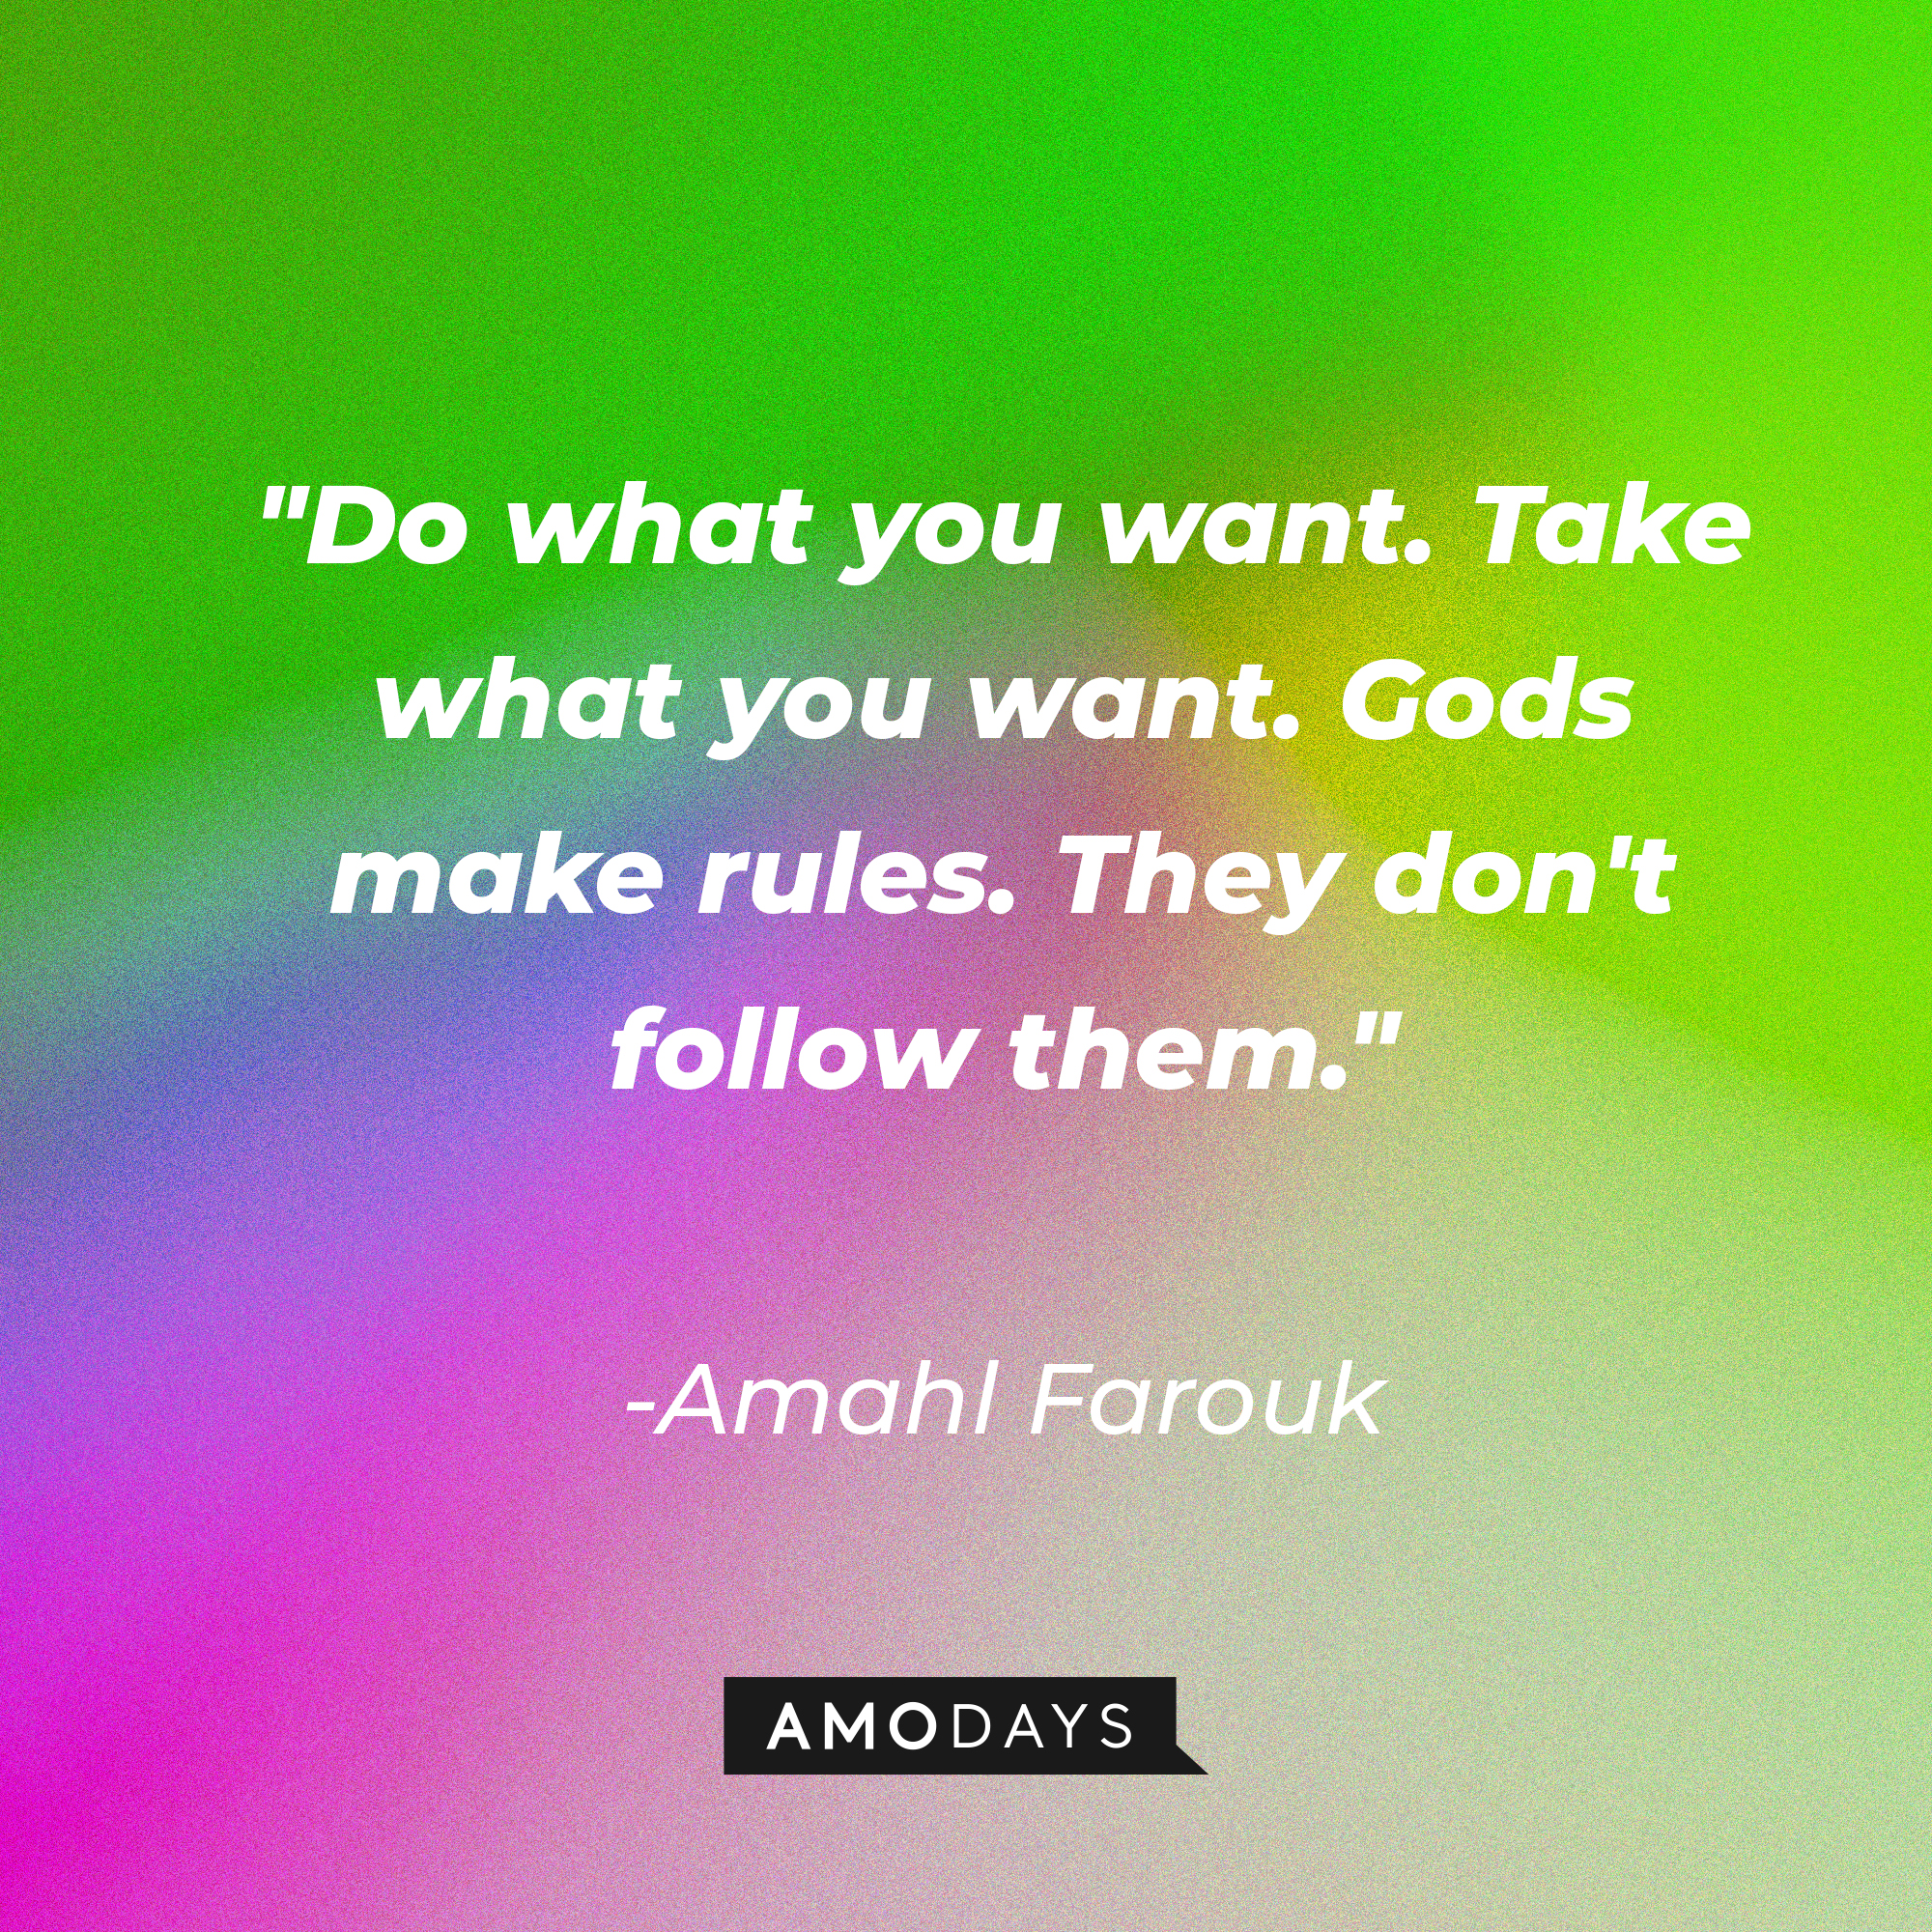 Amahl Farouk's quote: "Do what you want. Take what you want. Gods make rules. They don't follow them." | Image: AmoDays